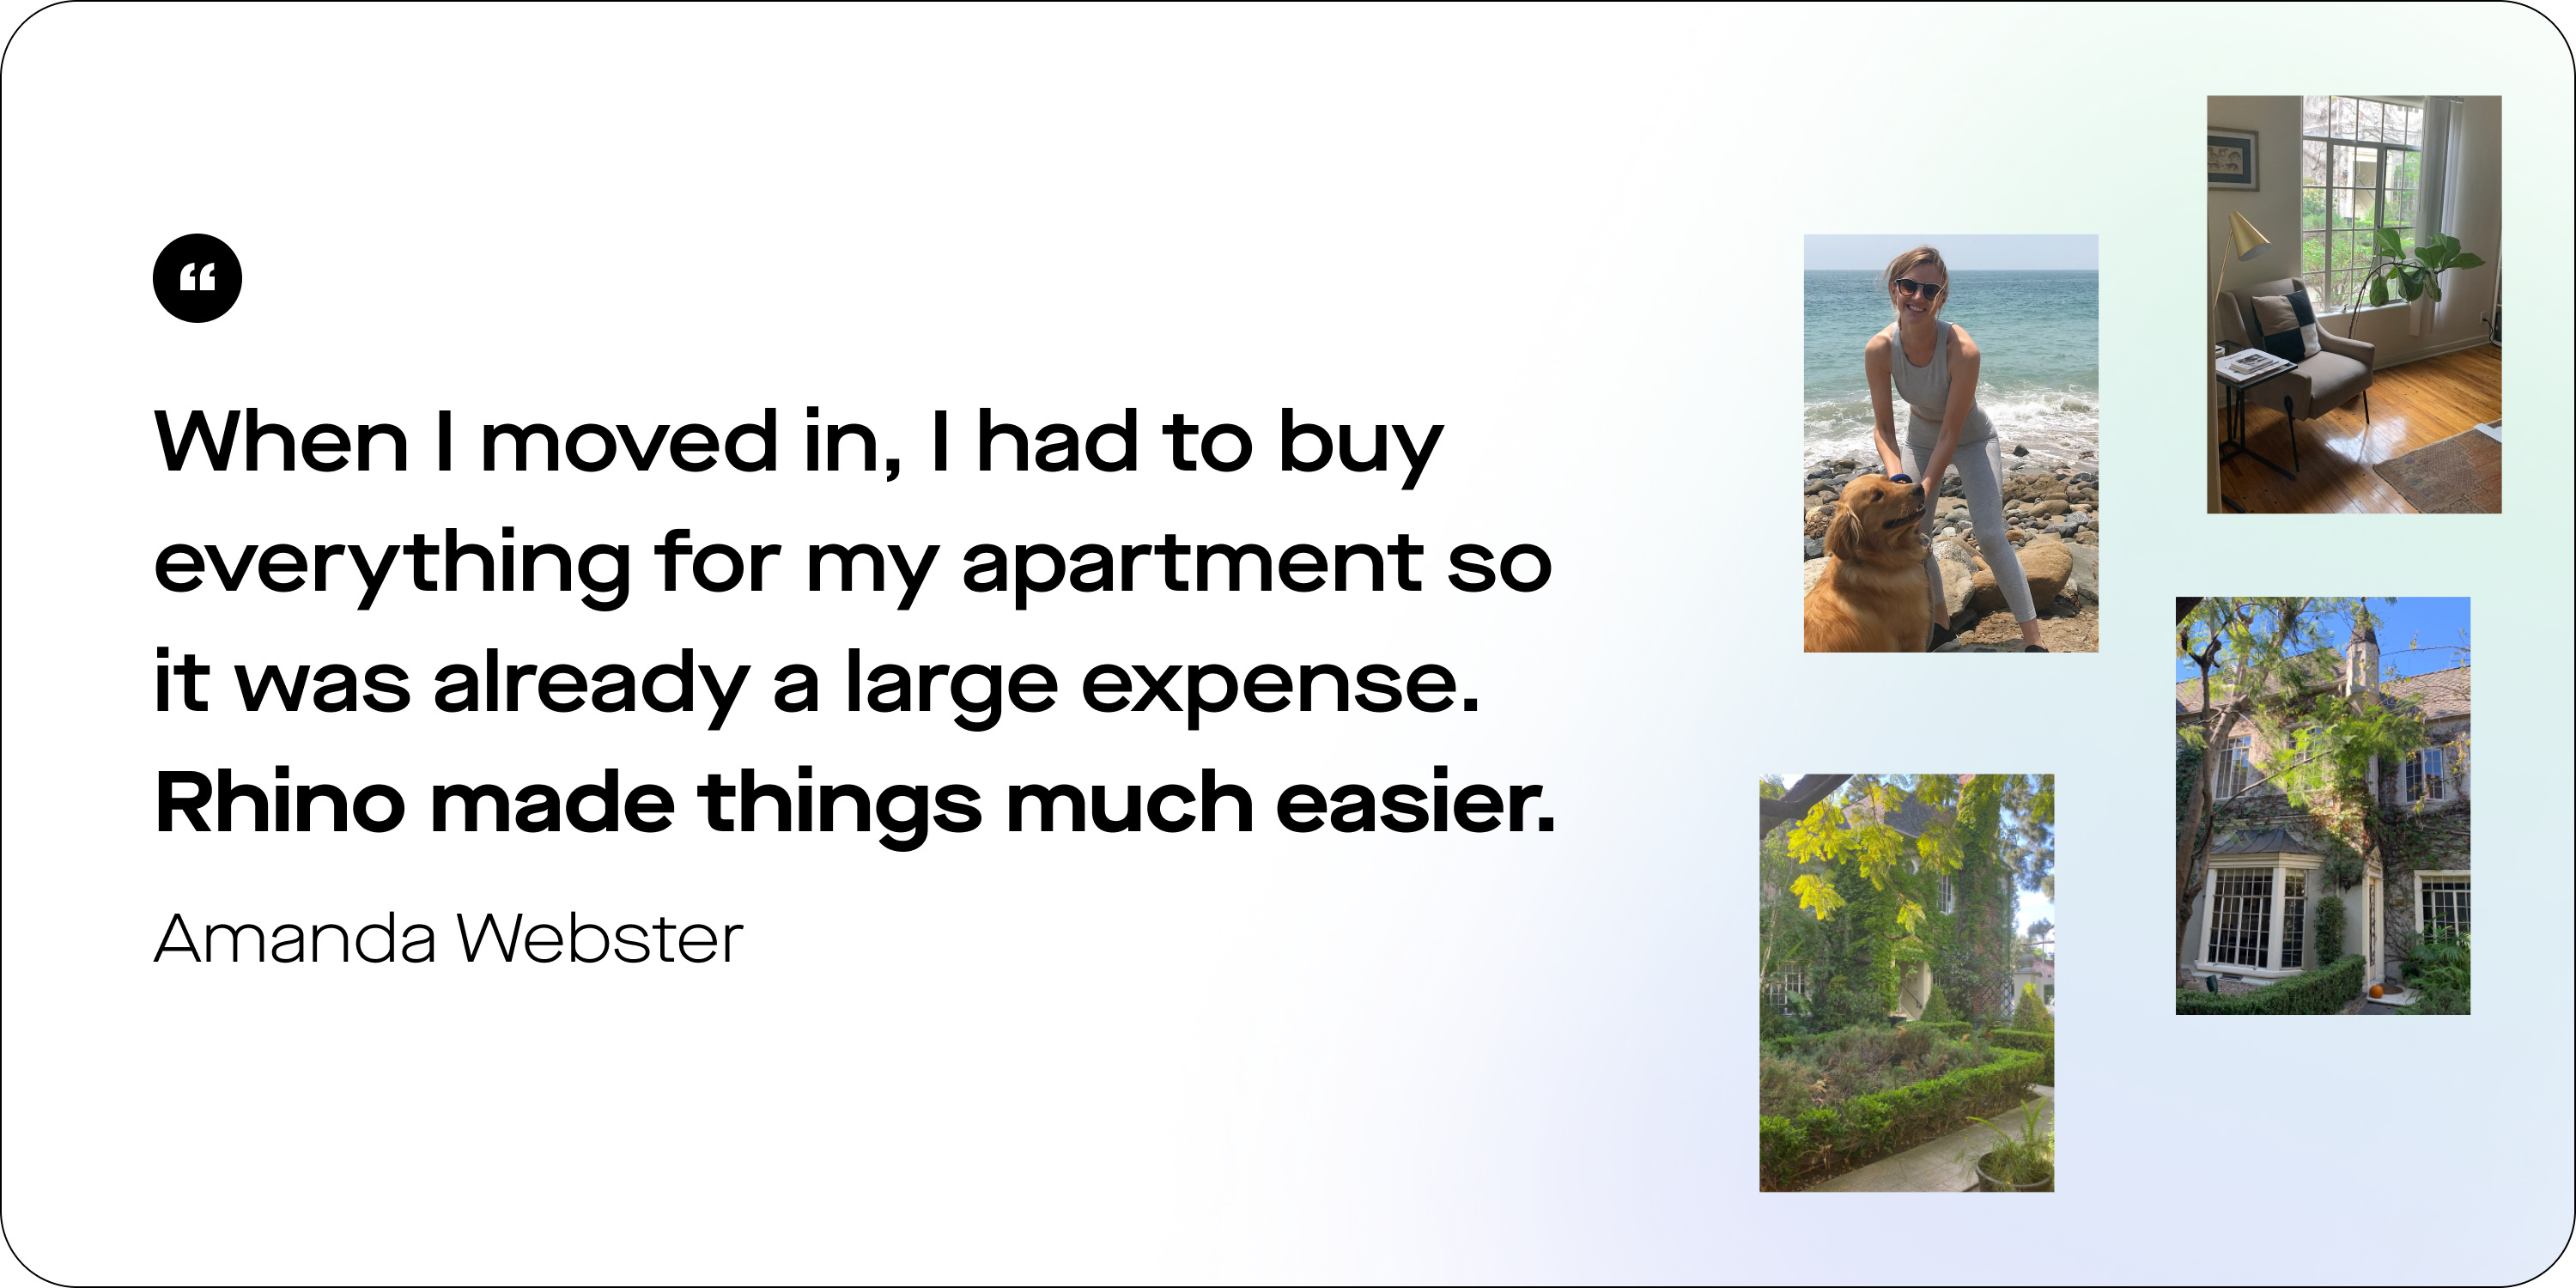 A graphic including a quote from a real Rhino renter advocate, Amanda Webster, "When I moved in, I had to buy everything for my apartment so it was already a large expense. Rhino made things much easier." 